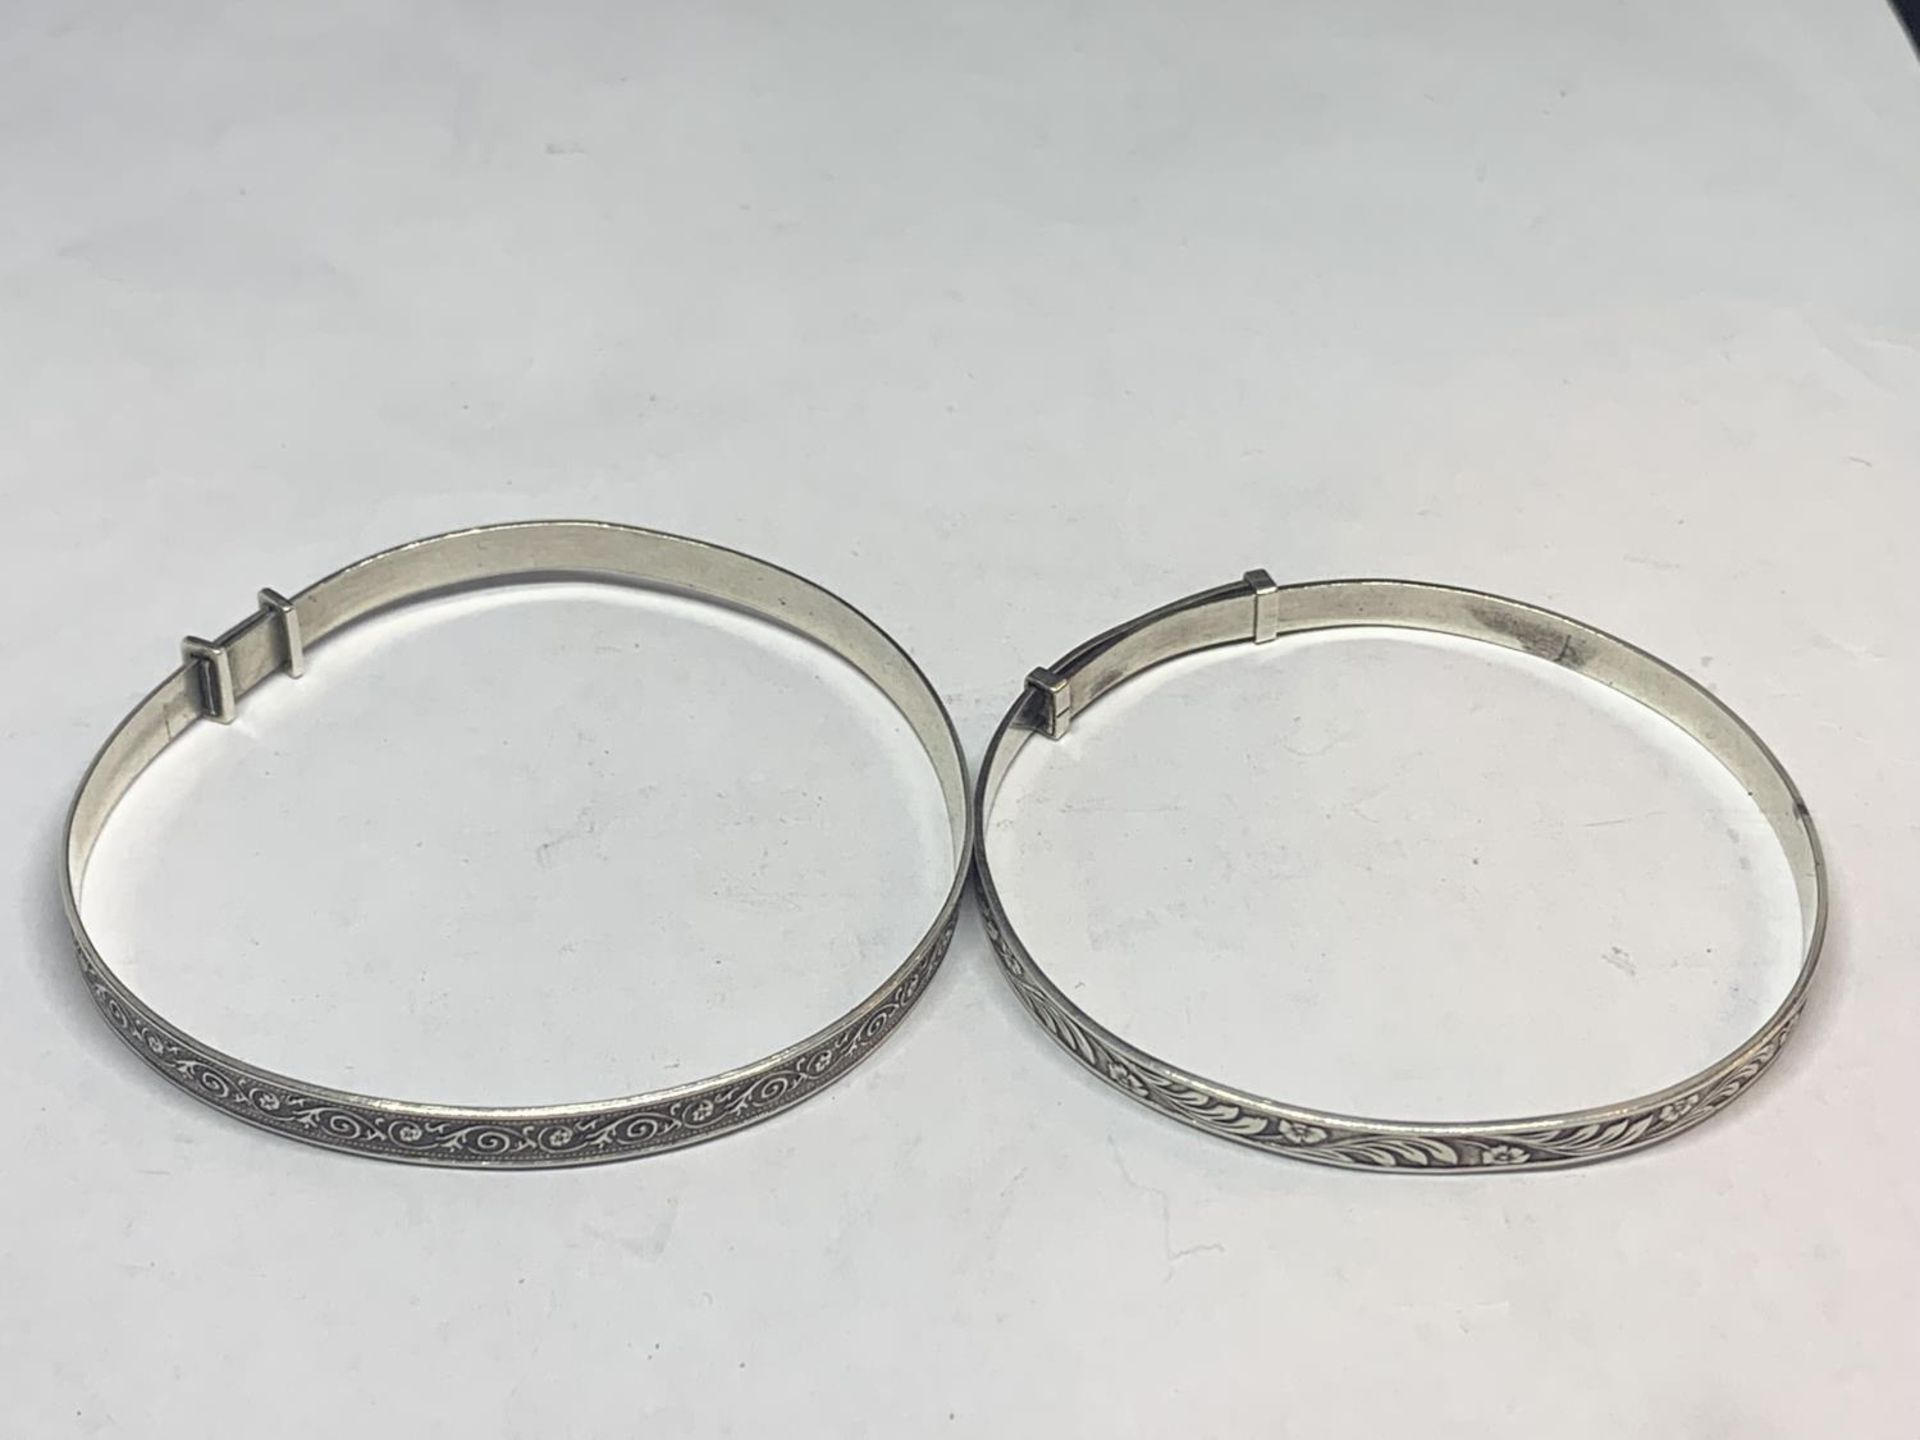 TWO SILVER CHRISTENING BANGLES - Image 4 of 4